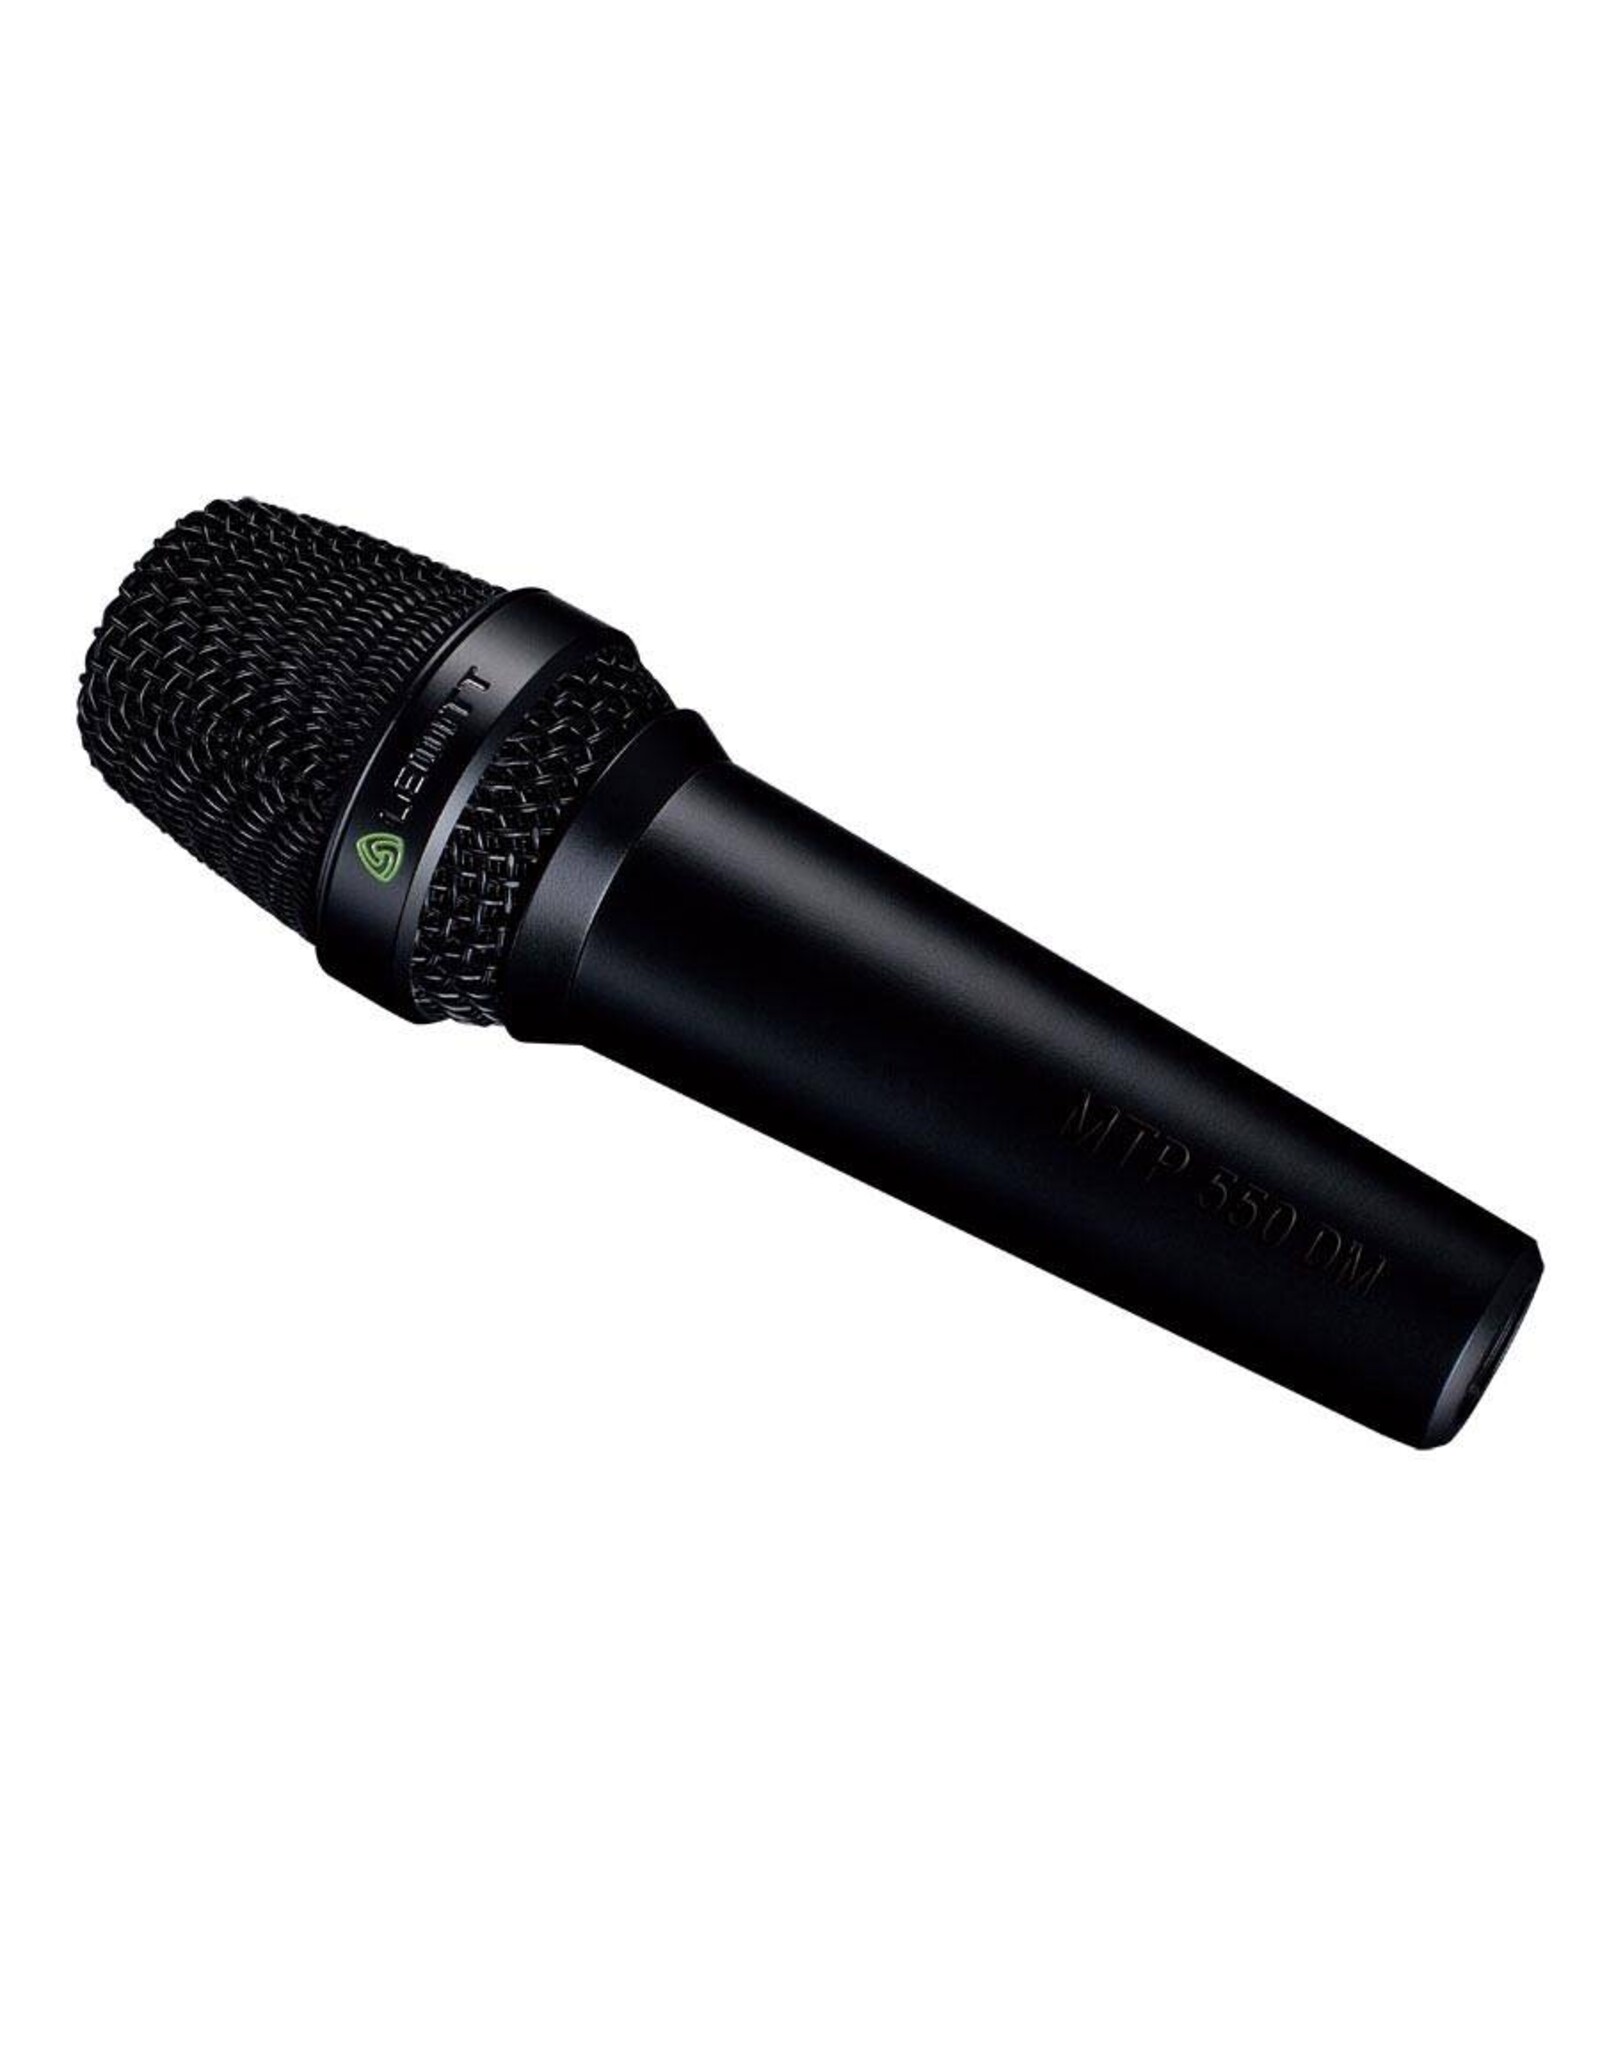 Lewitt MTP550DMS Vocal Microfoon with switch